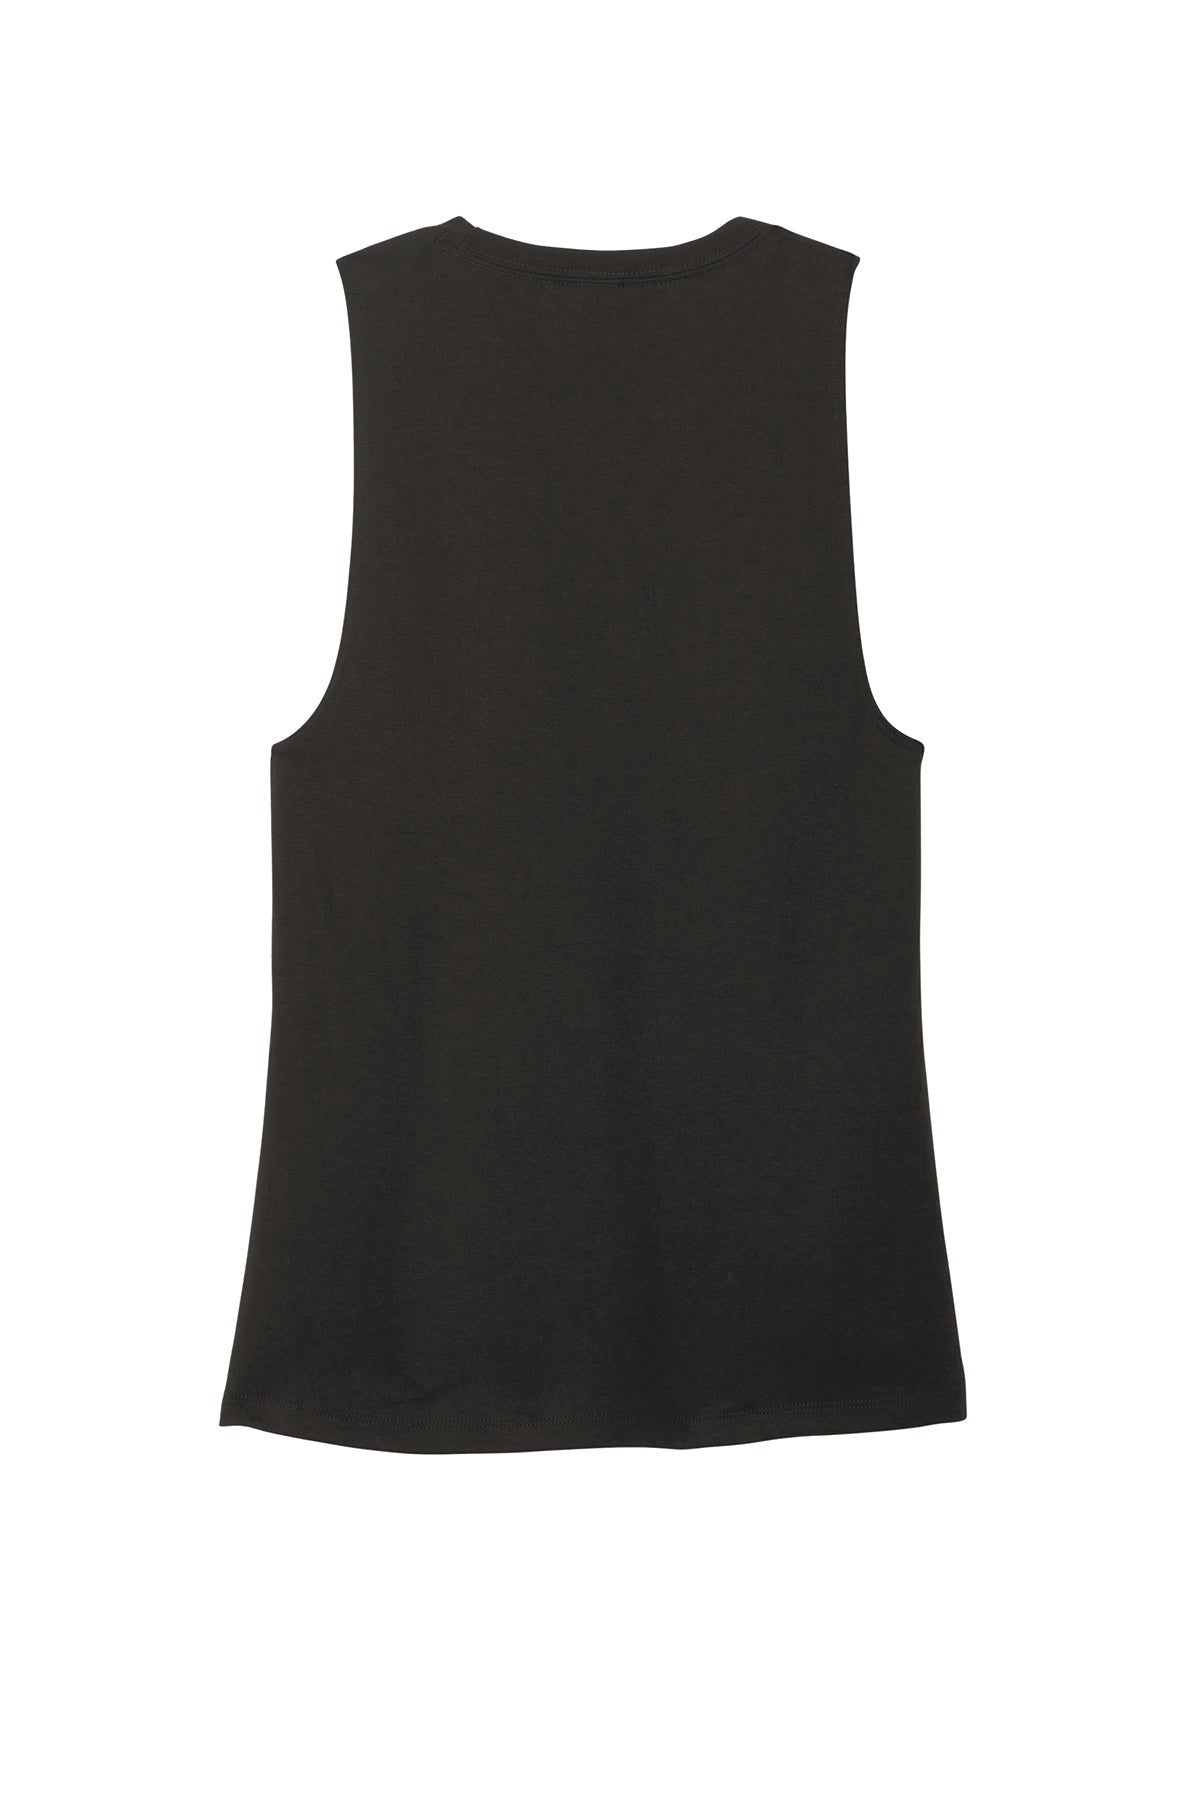 DT153 District Women’s Perfect Tri Muscle Tank